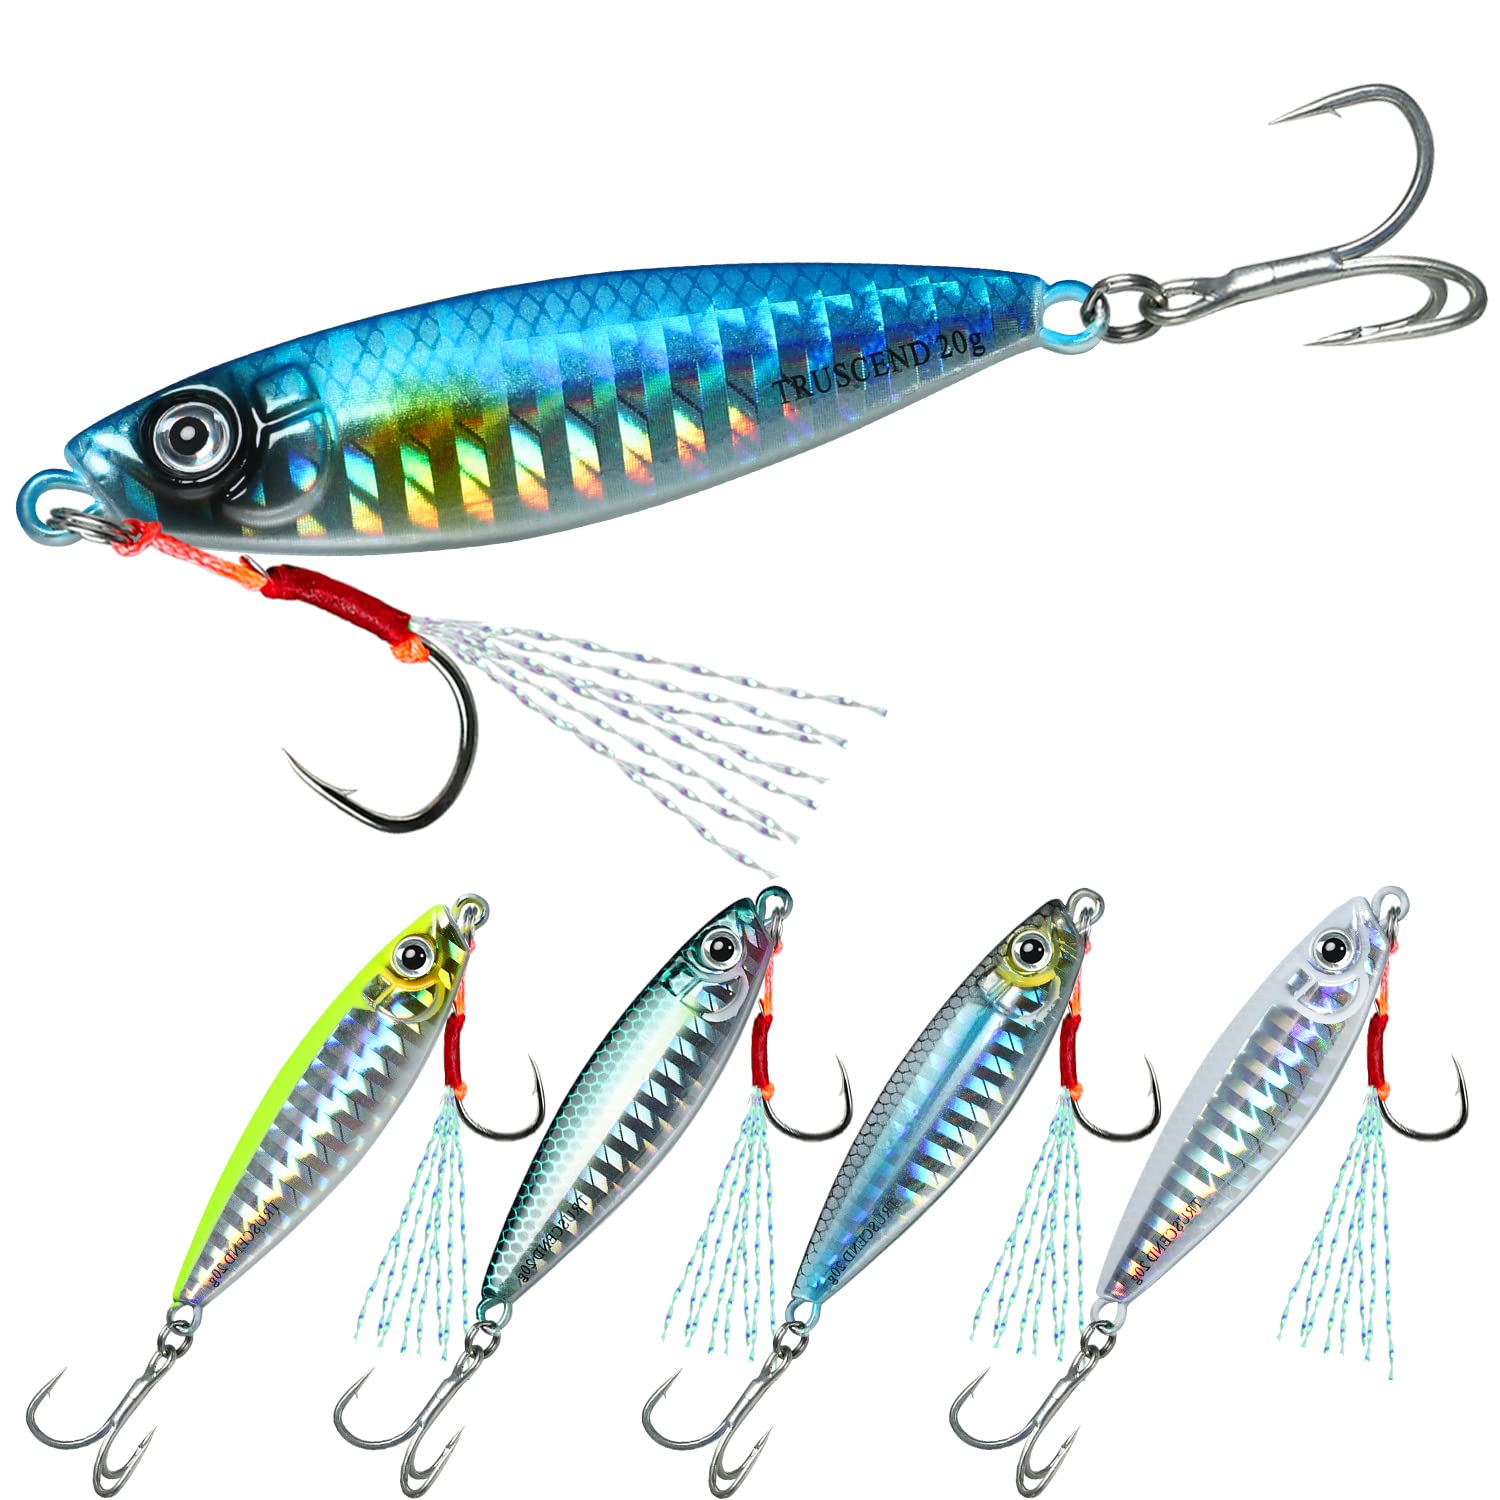 TRUSCEND Saltwater Jigs Fishing Lures 10g-160g with Flat BKK Hooks, Slow  Pitch/Knife/Vertical Jigs, Saltwater Spoon Lure for Tuna Salmon Grouper, Sea  Fishing Jigging Lure, Blade Bait for Bass Fishing F3-2.4-0.7oz